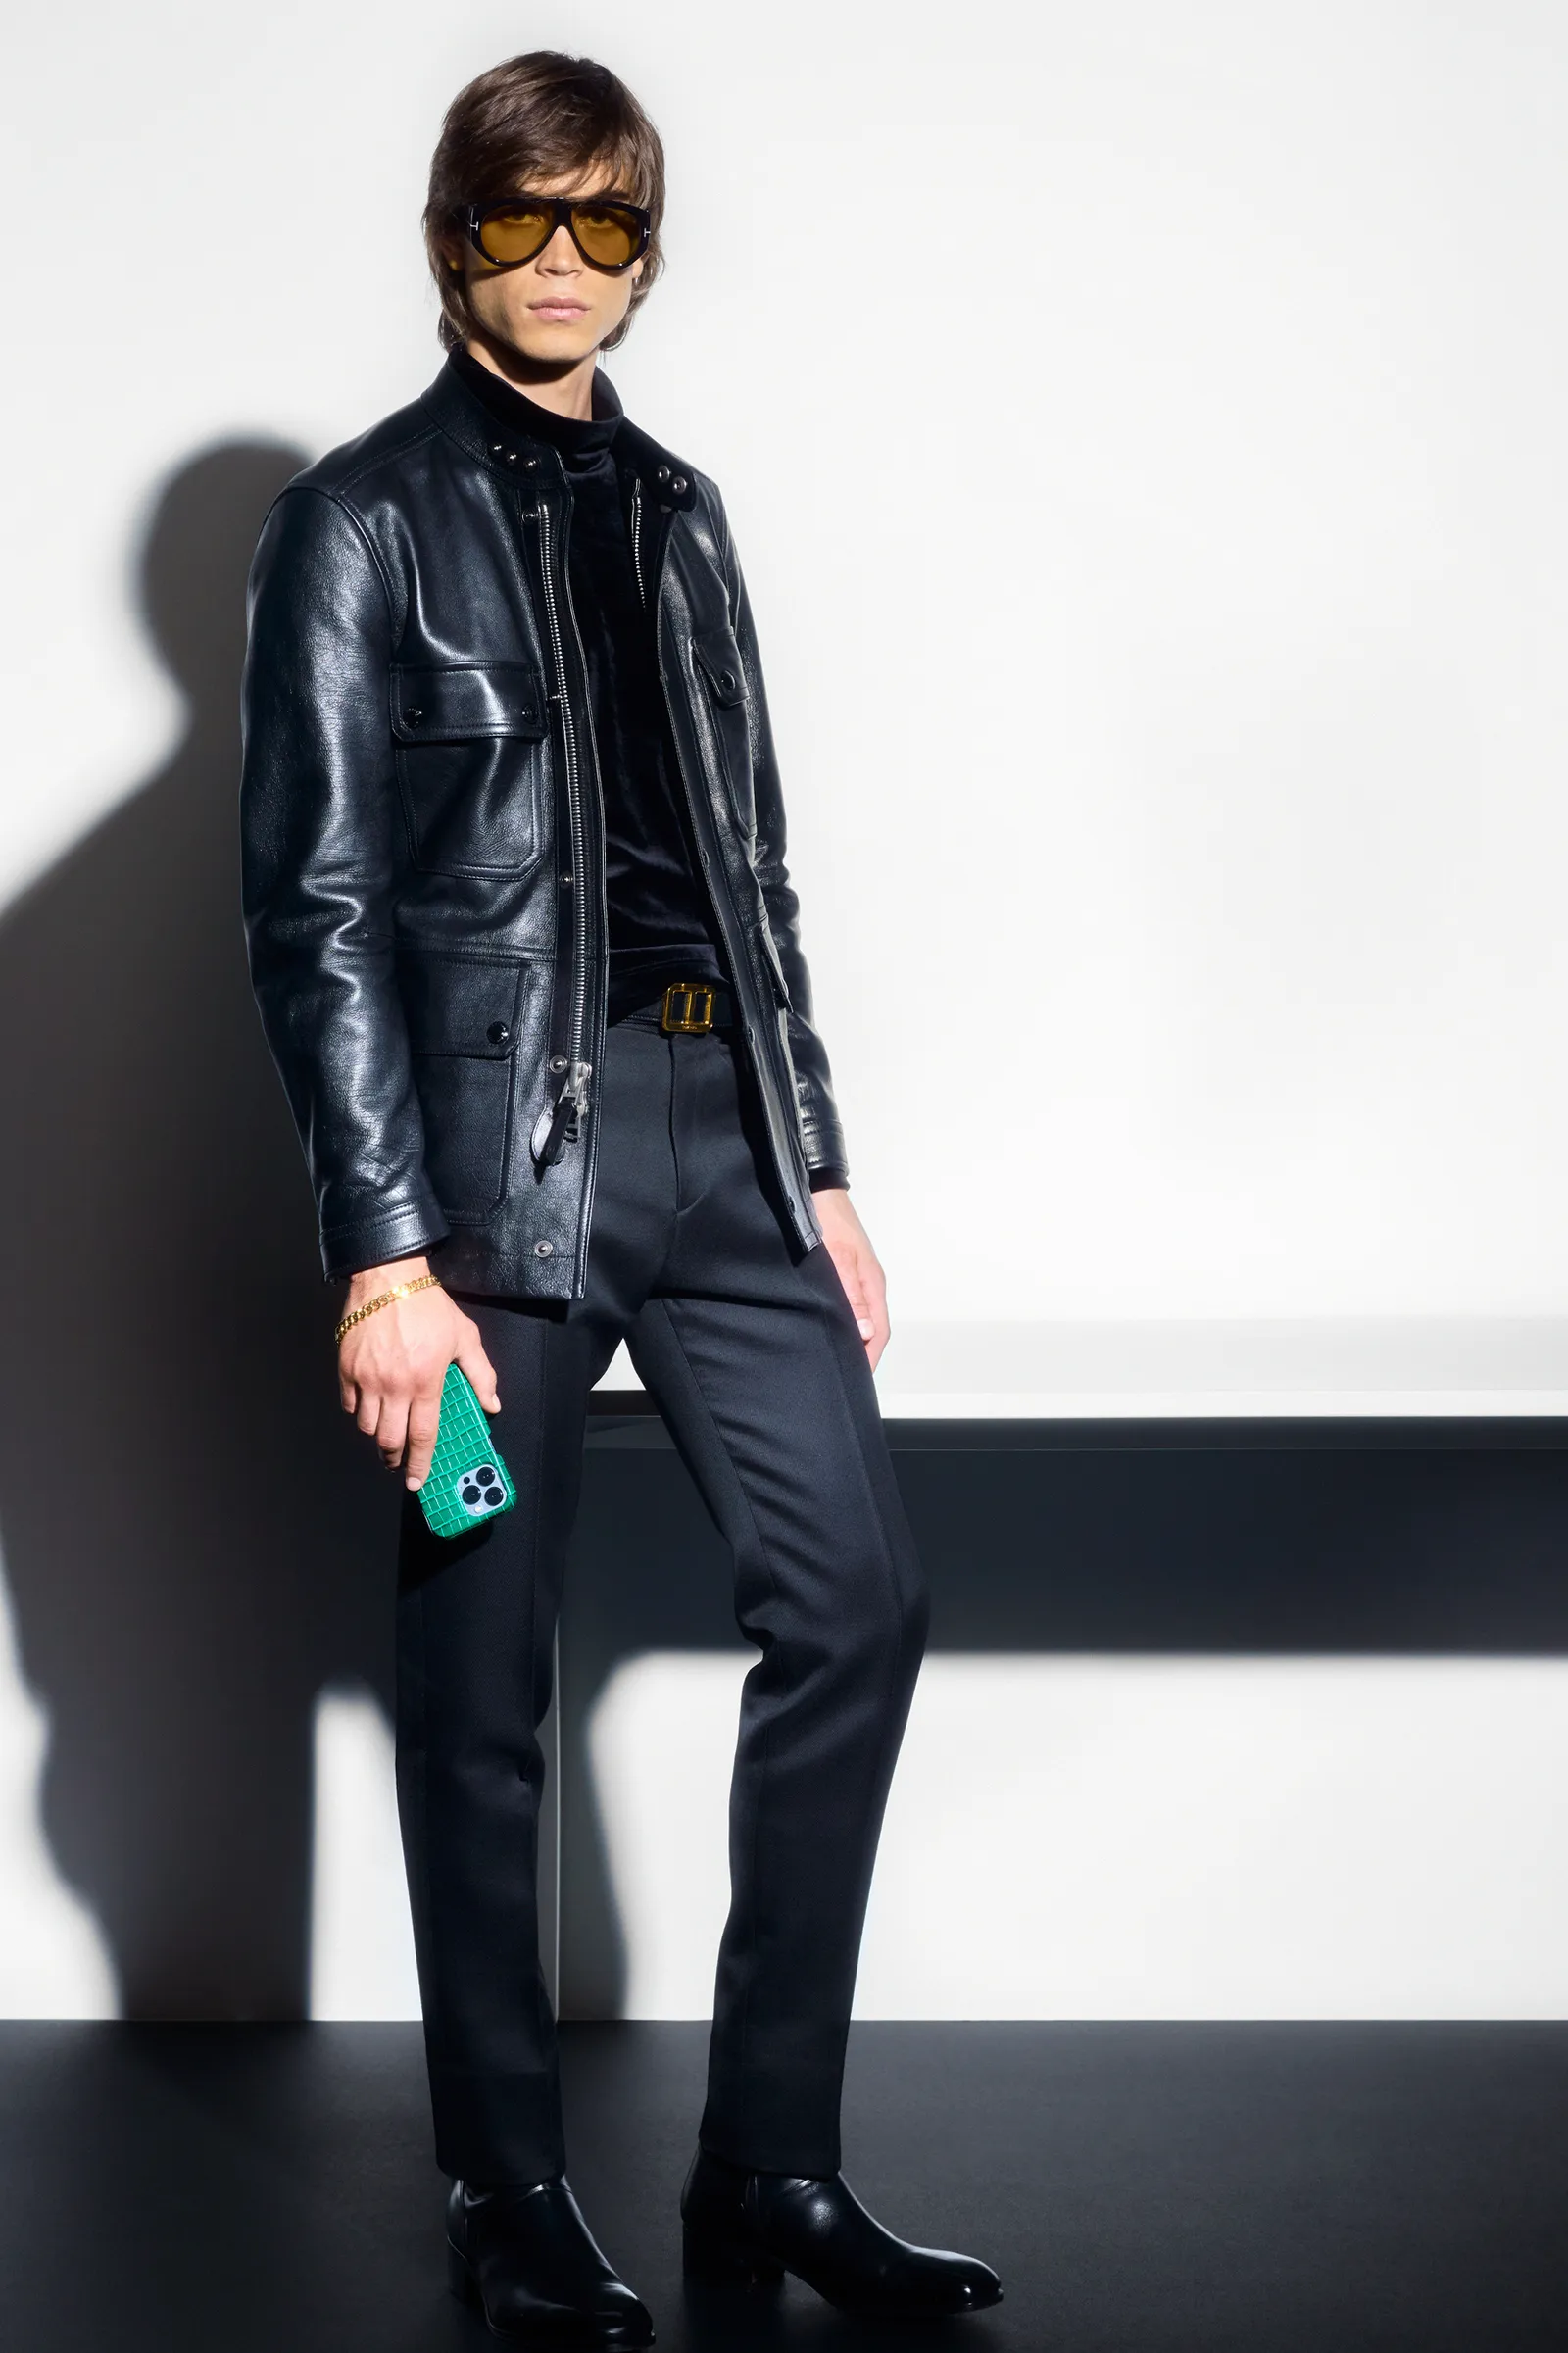 00025-tom-ford-fall-22-mens-nyc-credit-brand.png